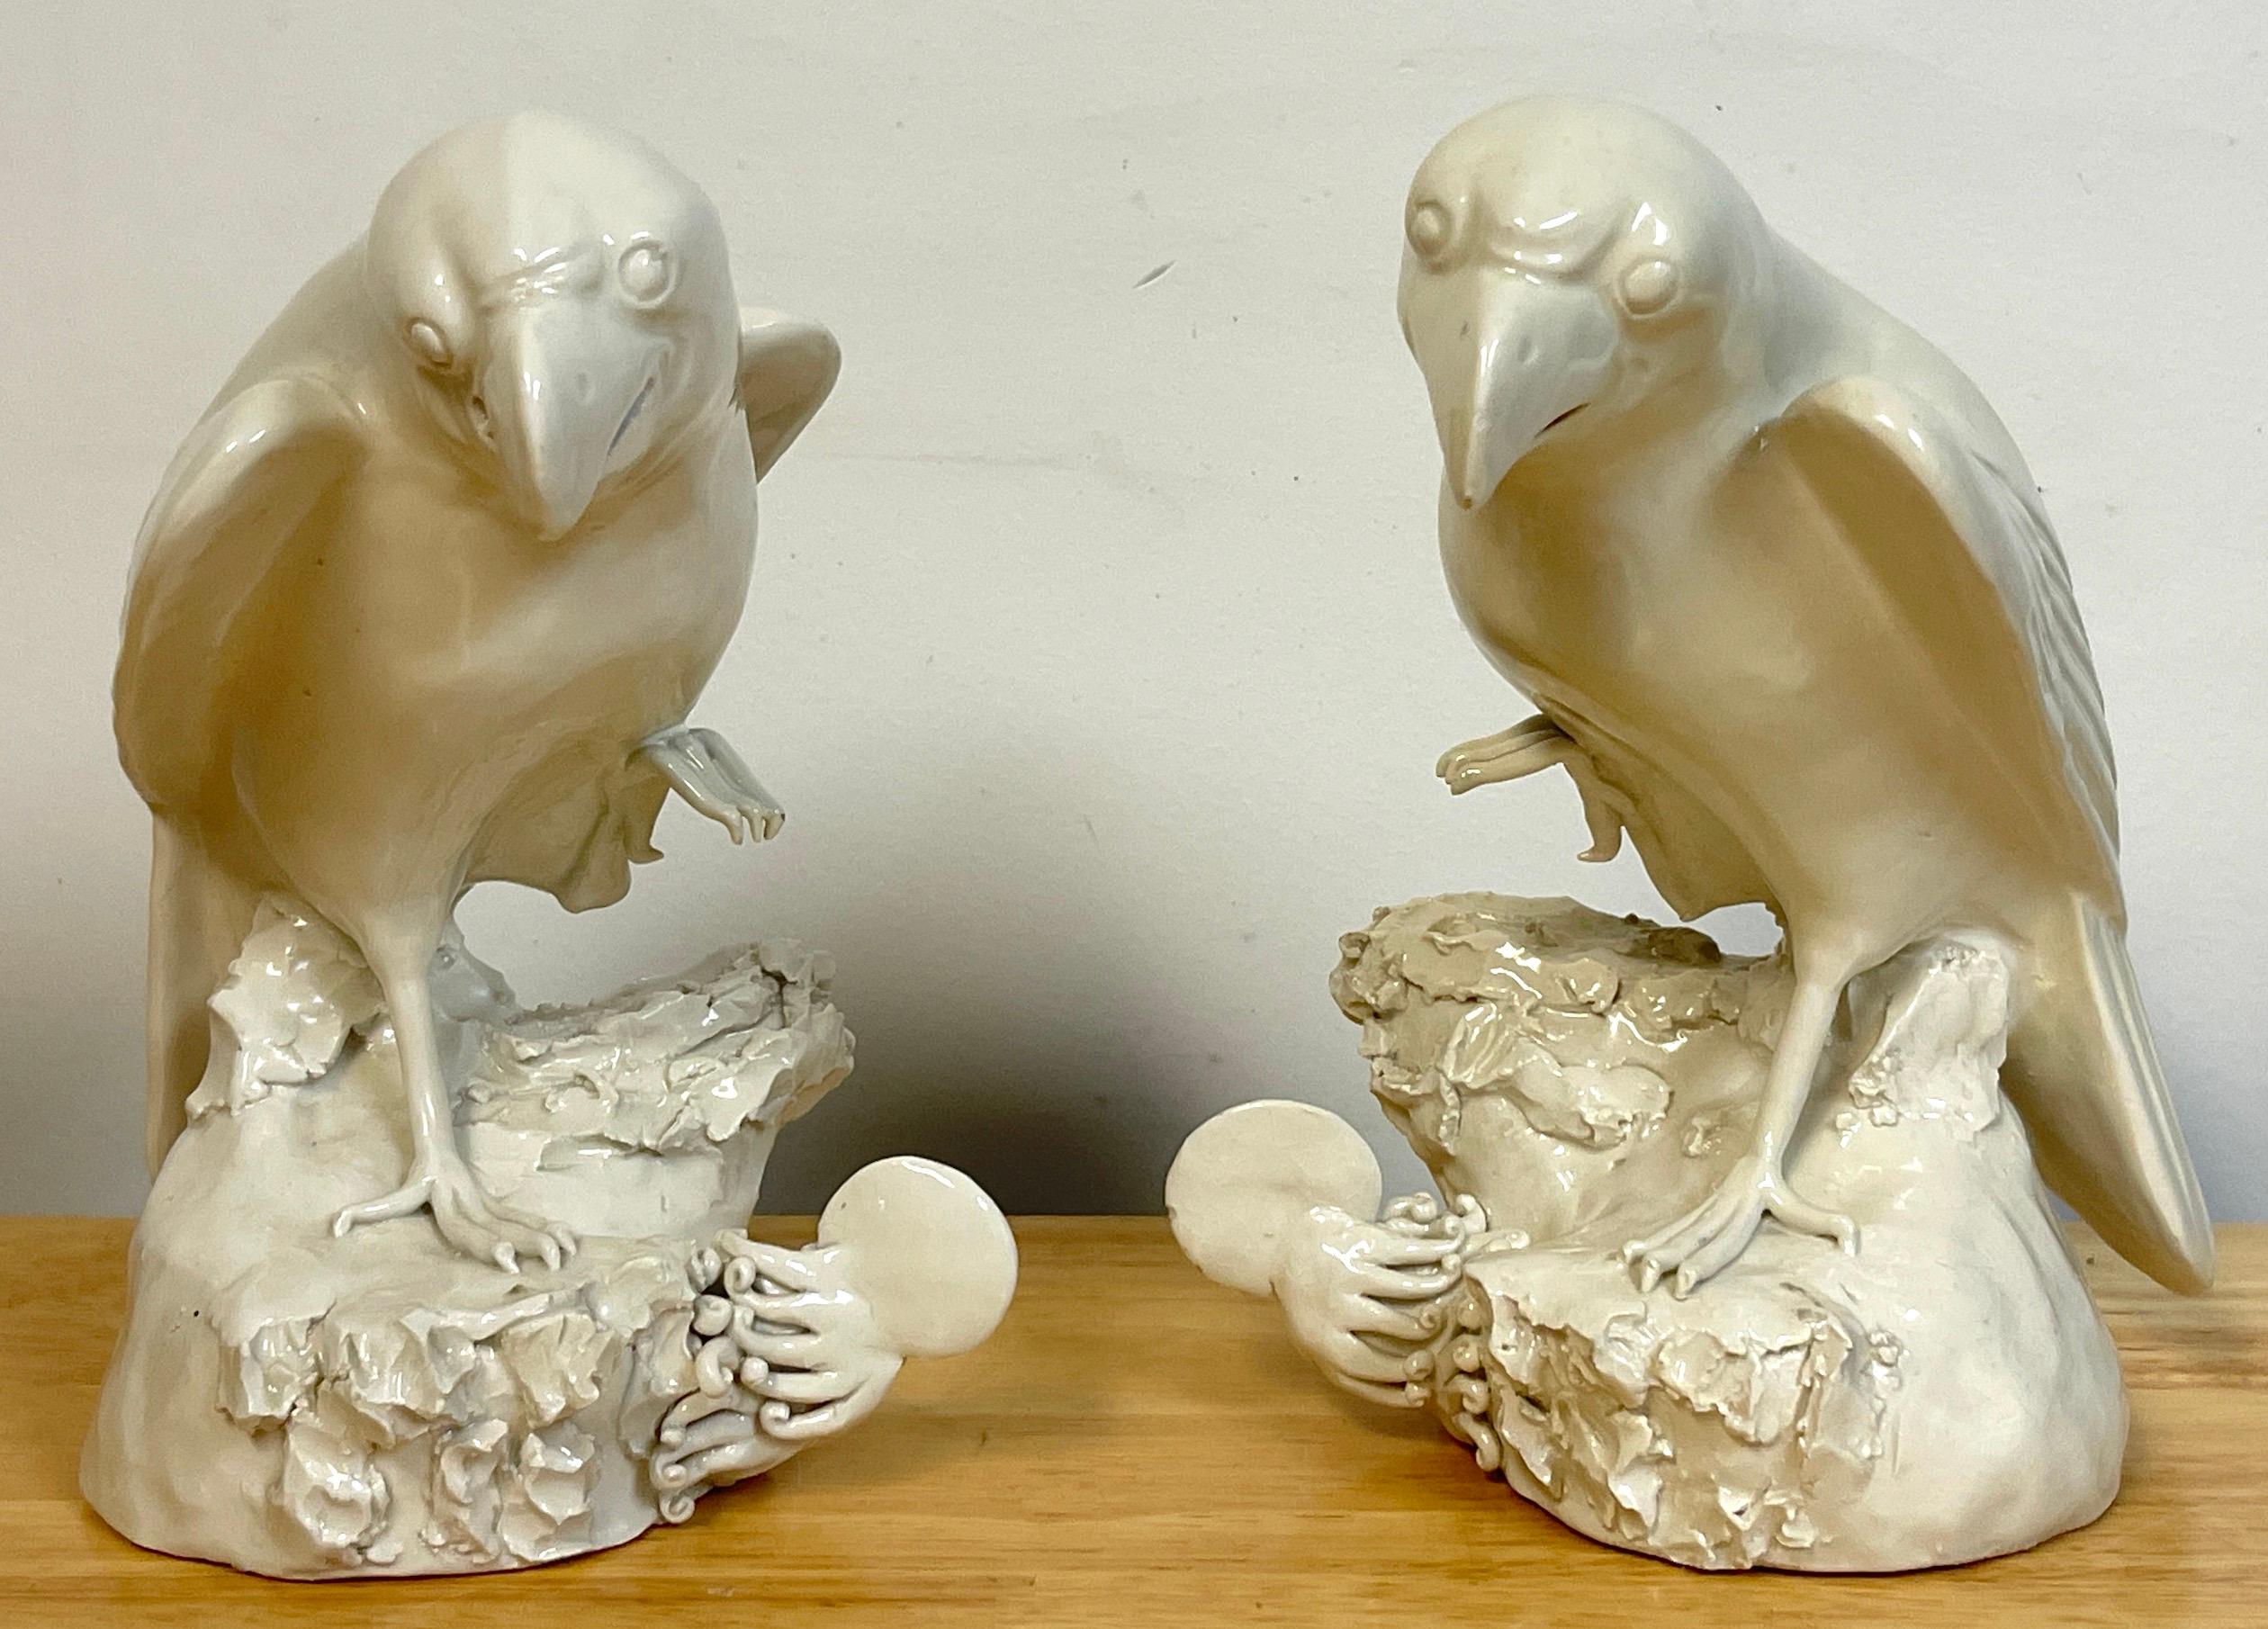 Pair of 19th C Chinese Blanc de Chine figures of parrots, each one standing on symbolistic naturalistic bases, standing with one leg raised, facing left and right. 
The base measures 4